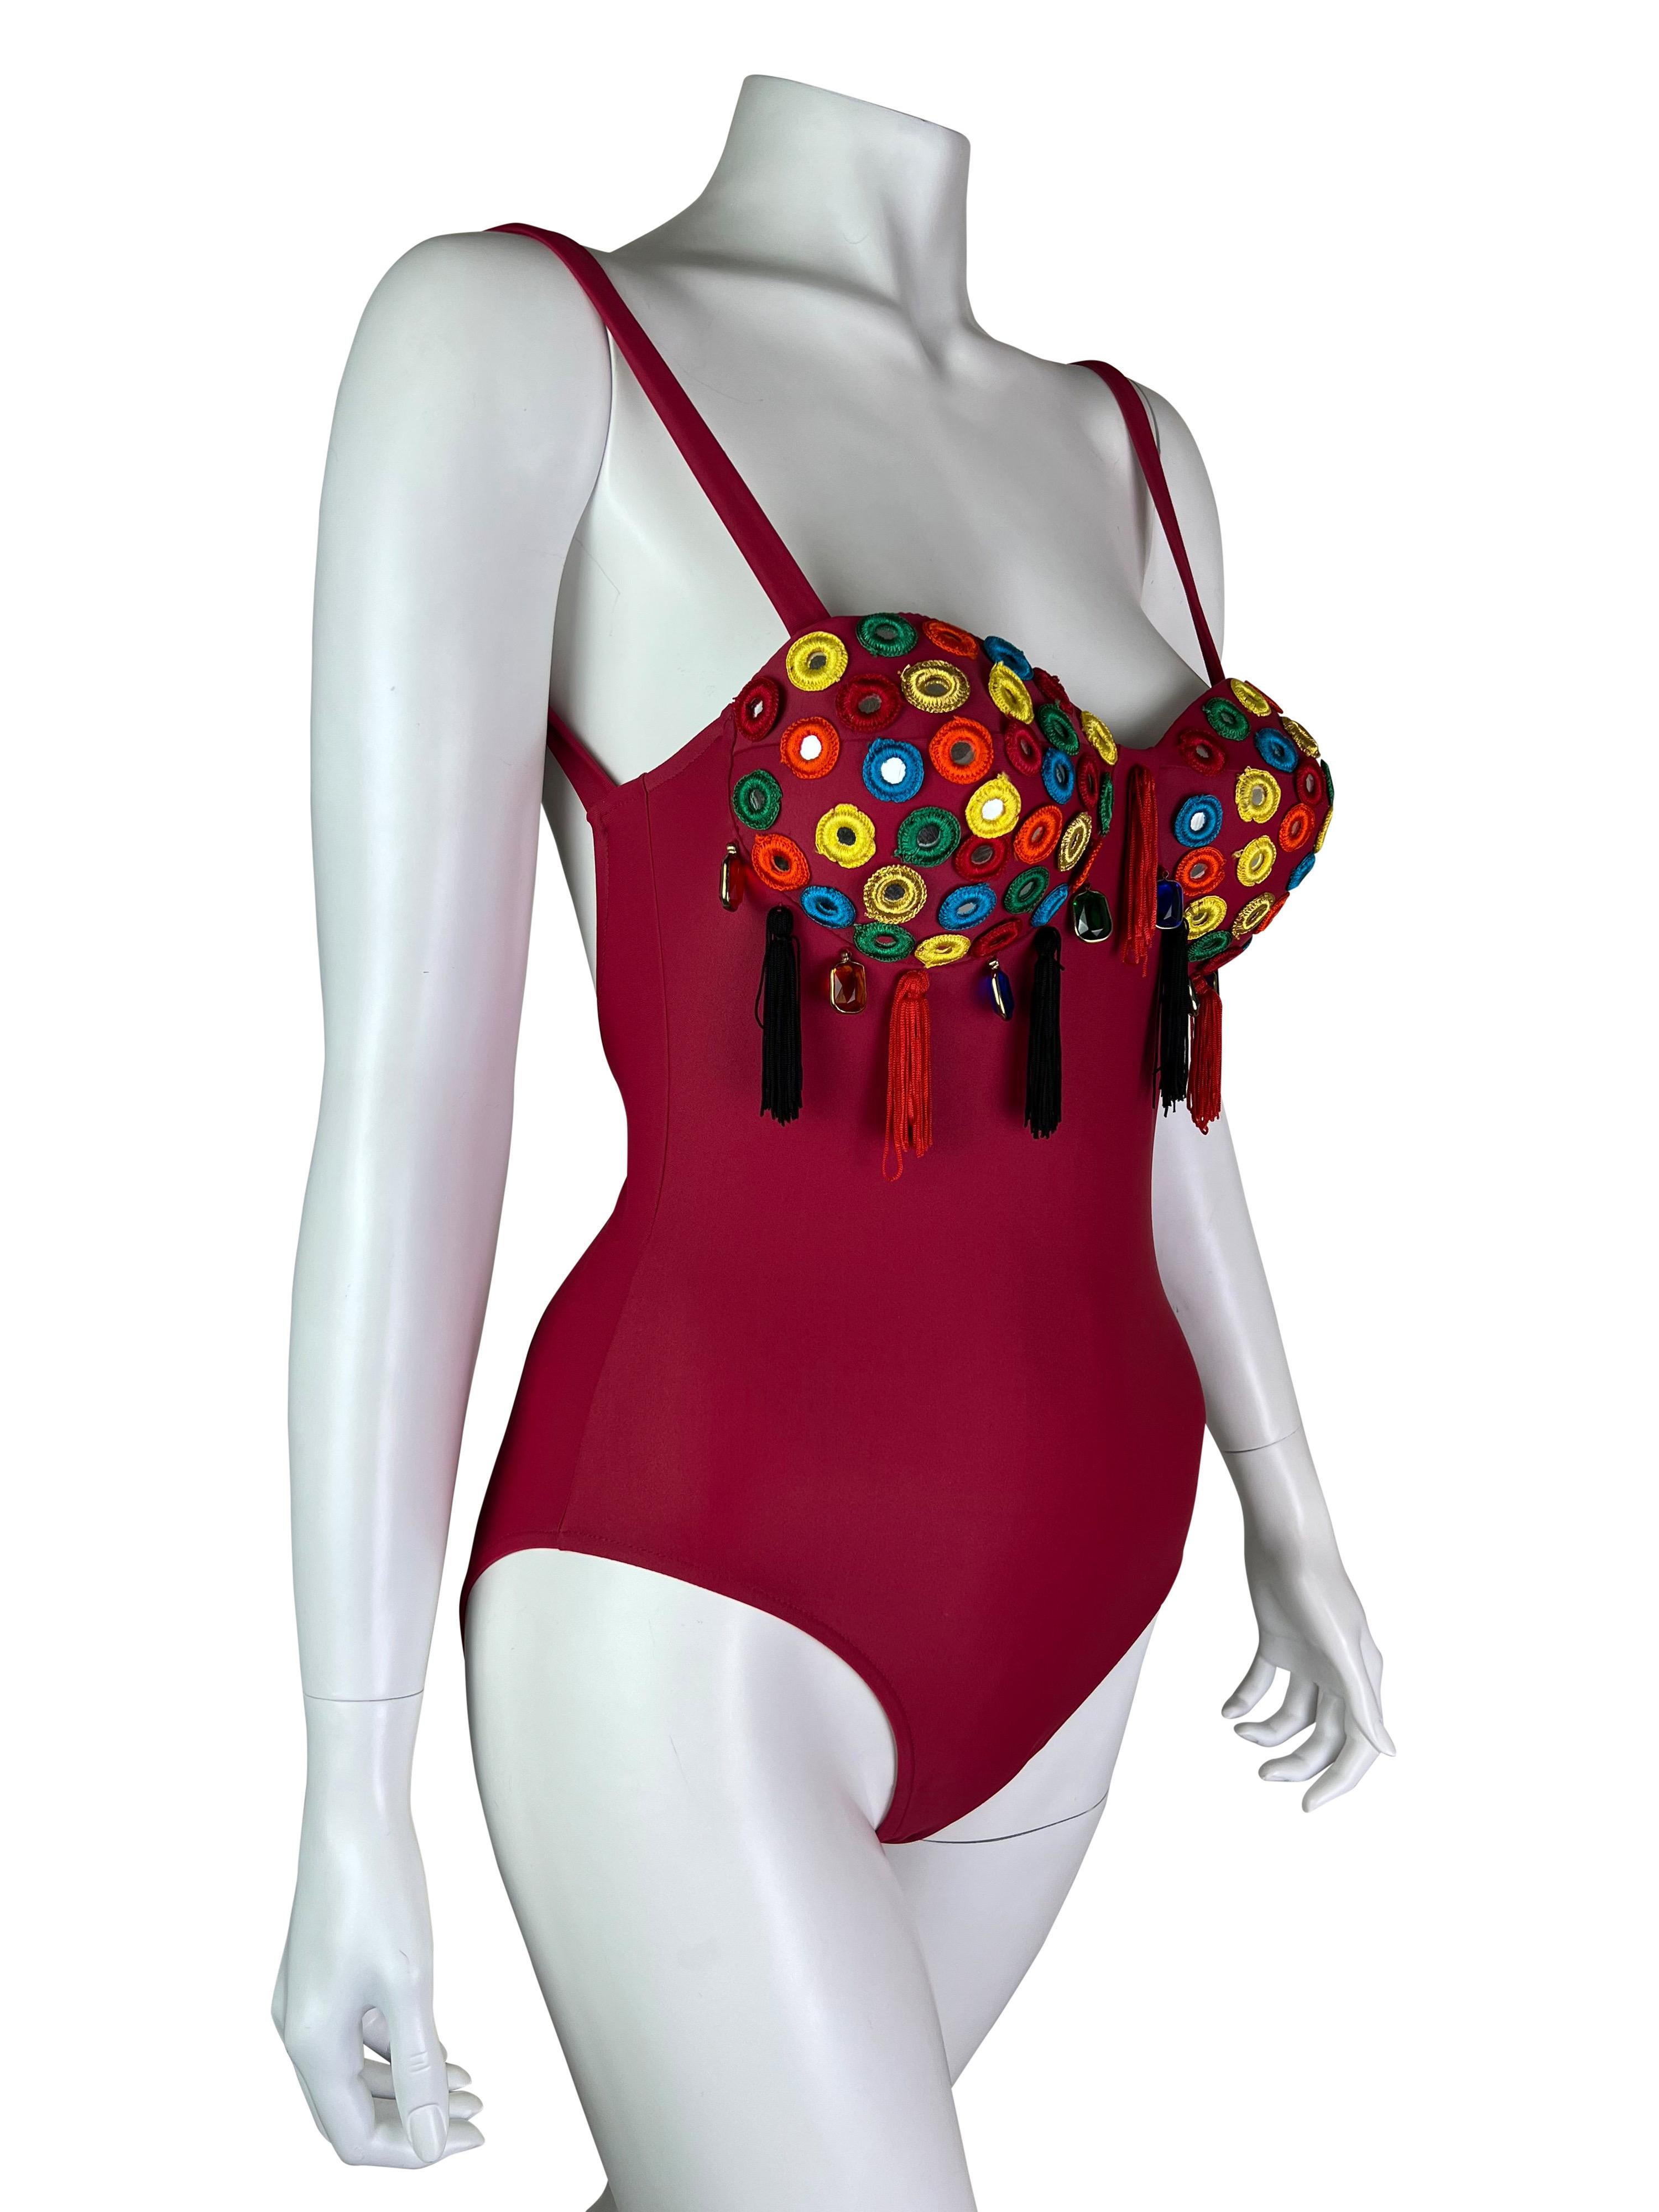 A stunning never worn swimsuit with beautiful embellishments from the iconic Dolce & Gabbana collection. 

Size IT 42, would fit sizes S and M, cups are padded and would fit sizes 34B, 34C, 36B the best.

Measurements (flat lay on one side, fabric